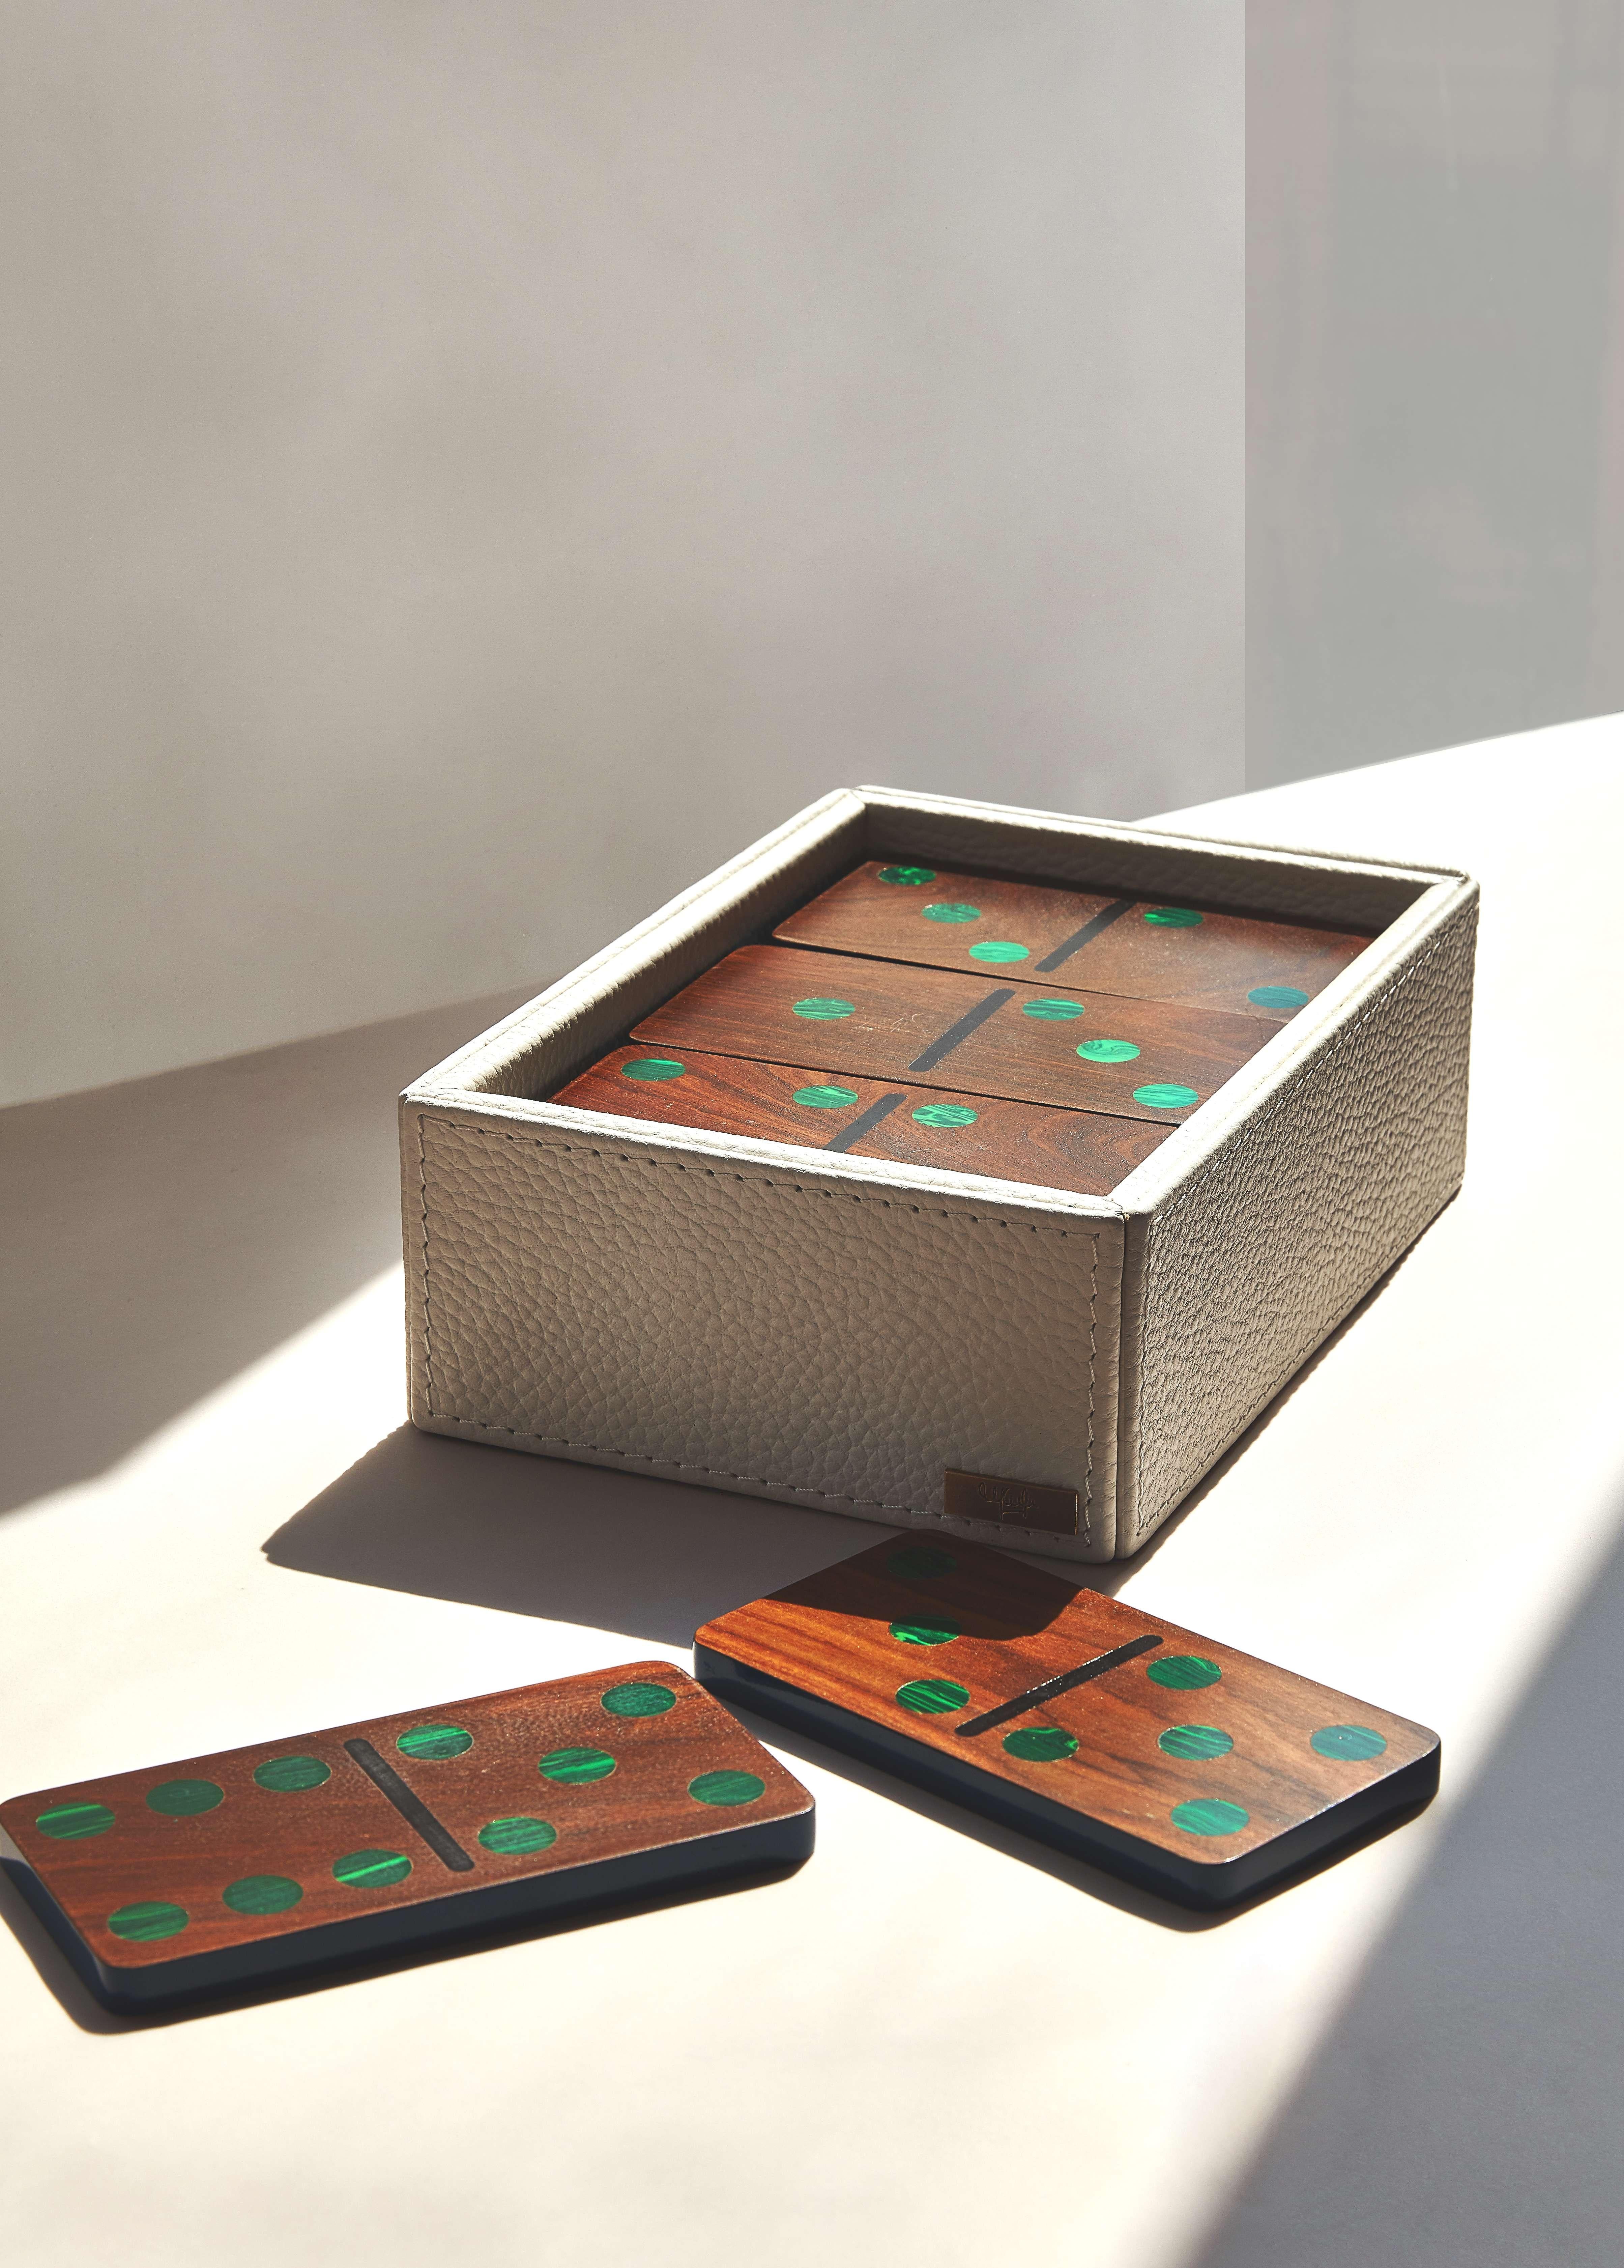 Our Large Domino set is composed of 28 pieces of pui wood with malachite inlay. Each piece is outlined in blue polyurethane paint and elegantly stored in a leather box.

Nothing better than having fun, and if you can do it in style even better.